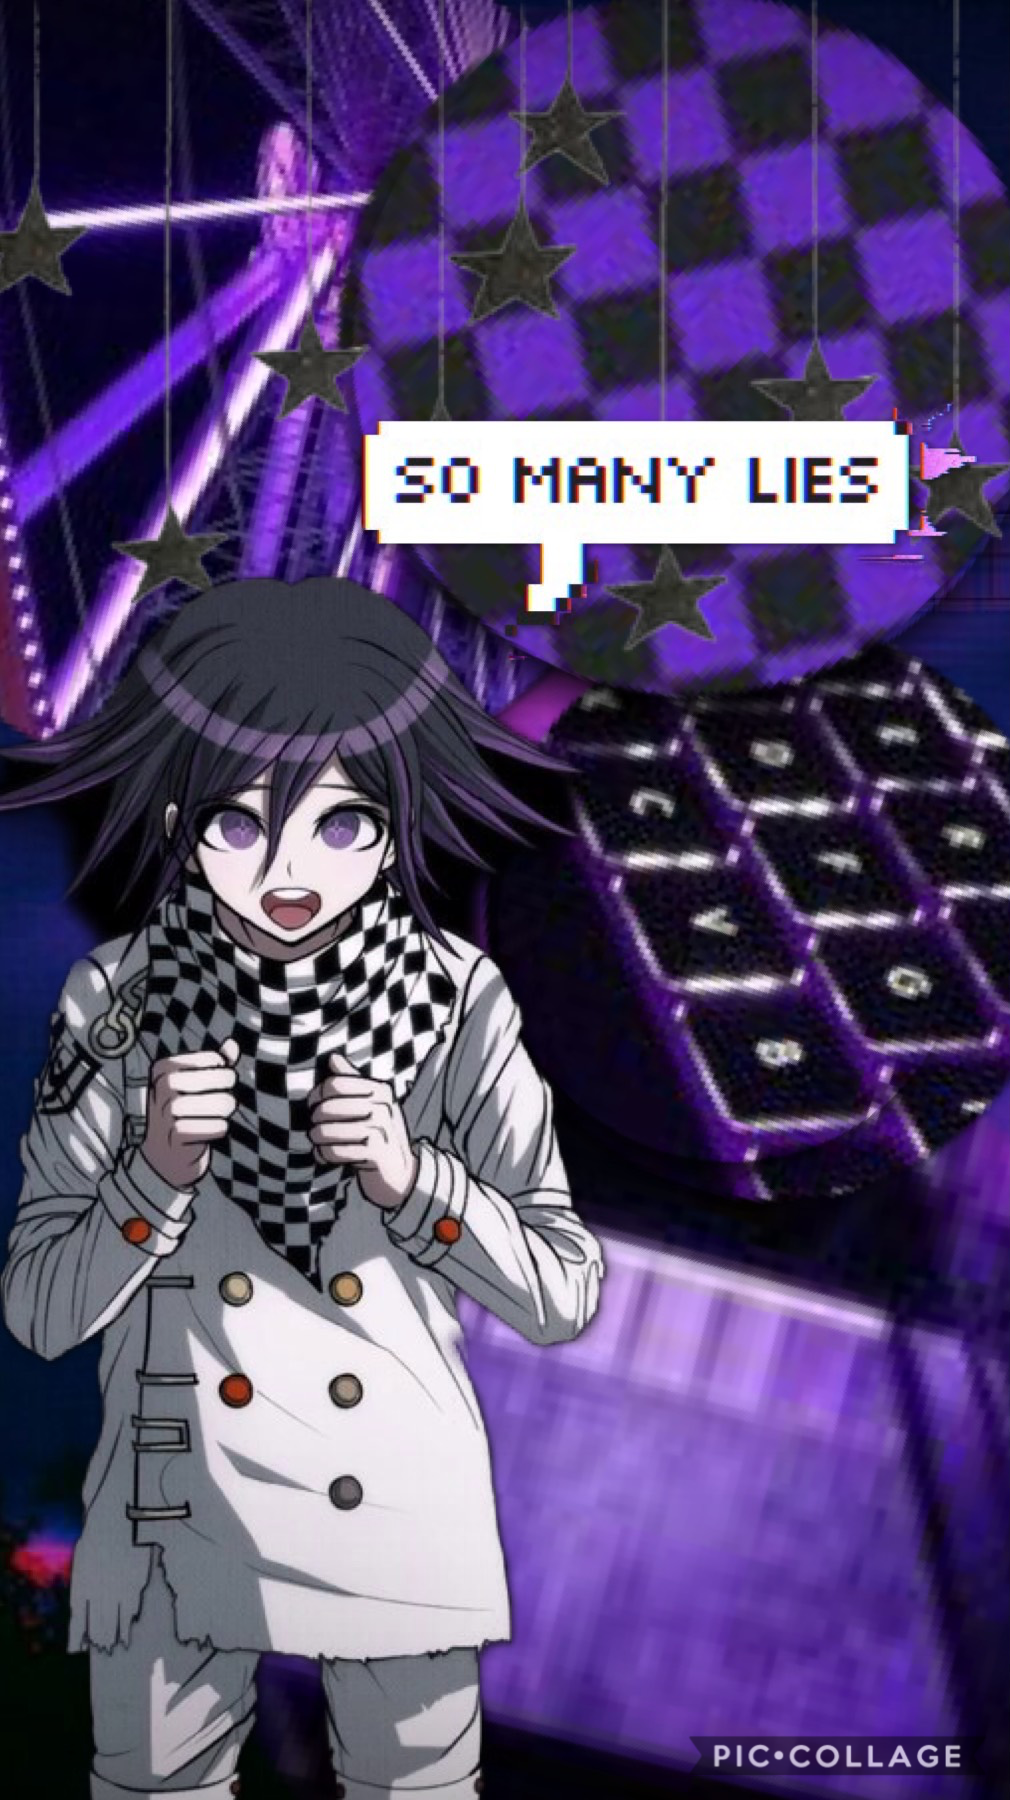 TAP 👇🏻
Entry for PurpleGames’ contest! Kind of a remake of one of my earlier edits, also involving Kokichi Oma and this style. I hope you enjoy! (I have mixed feelings about it, but then again I have mixed feelings about all my edits) Please give feedback